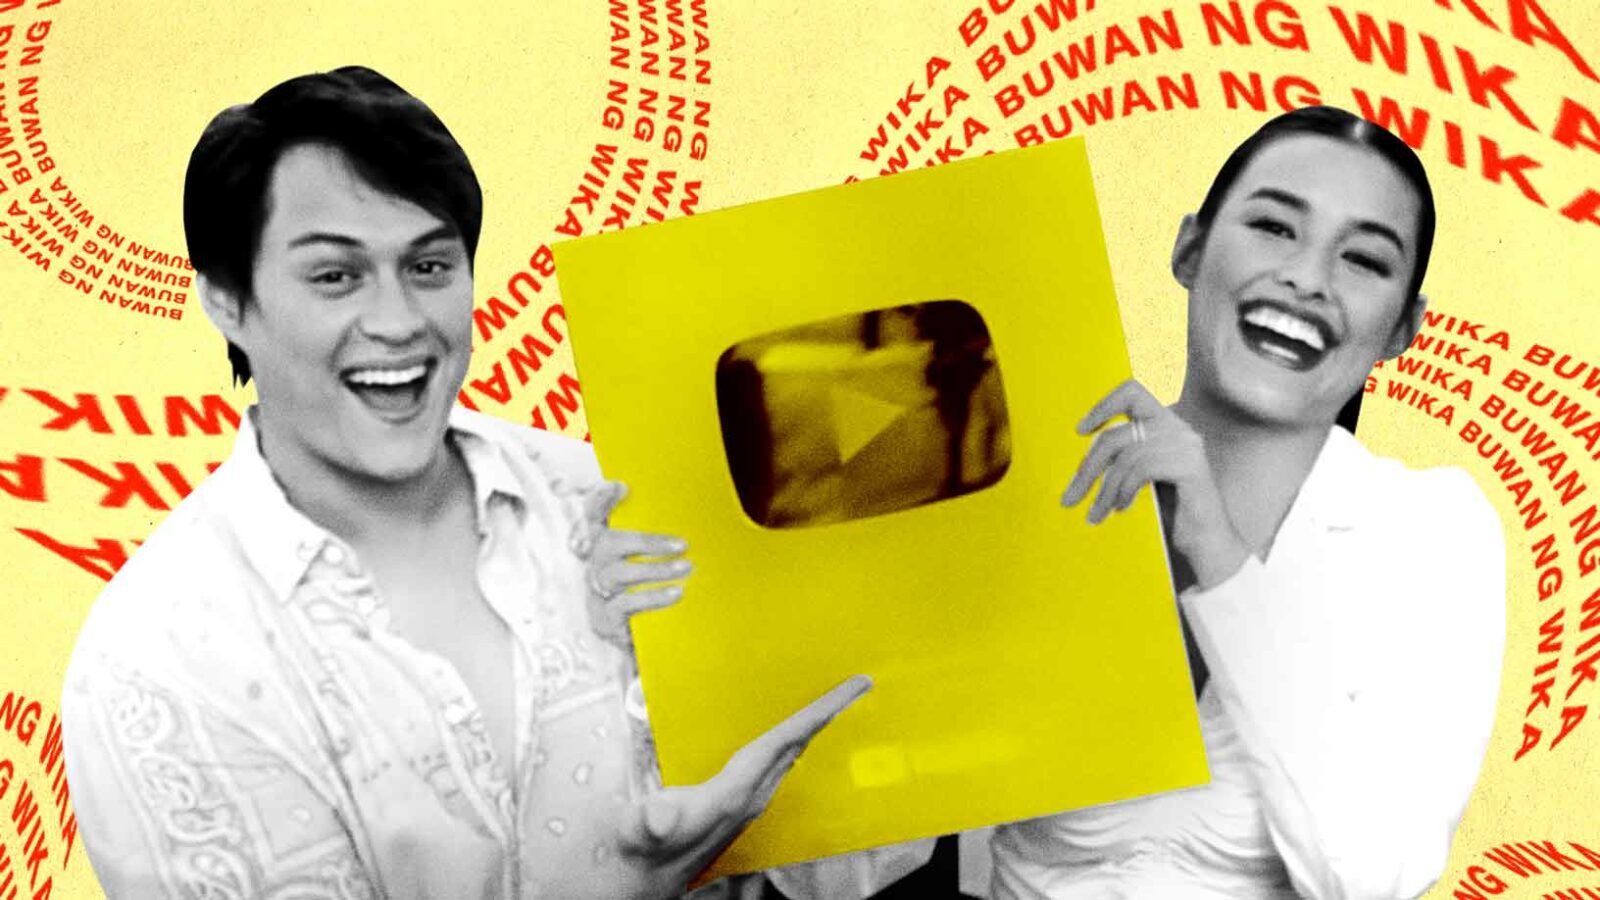 Watch Liza Soberano Celebrate Her YouTube Gold Play Button And Buwan Ng Wika With Enrique Gil